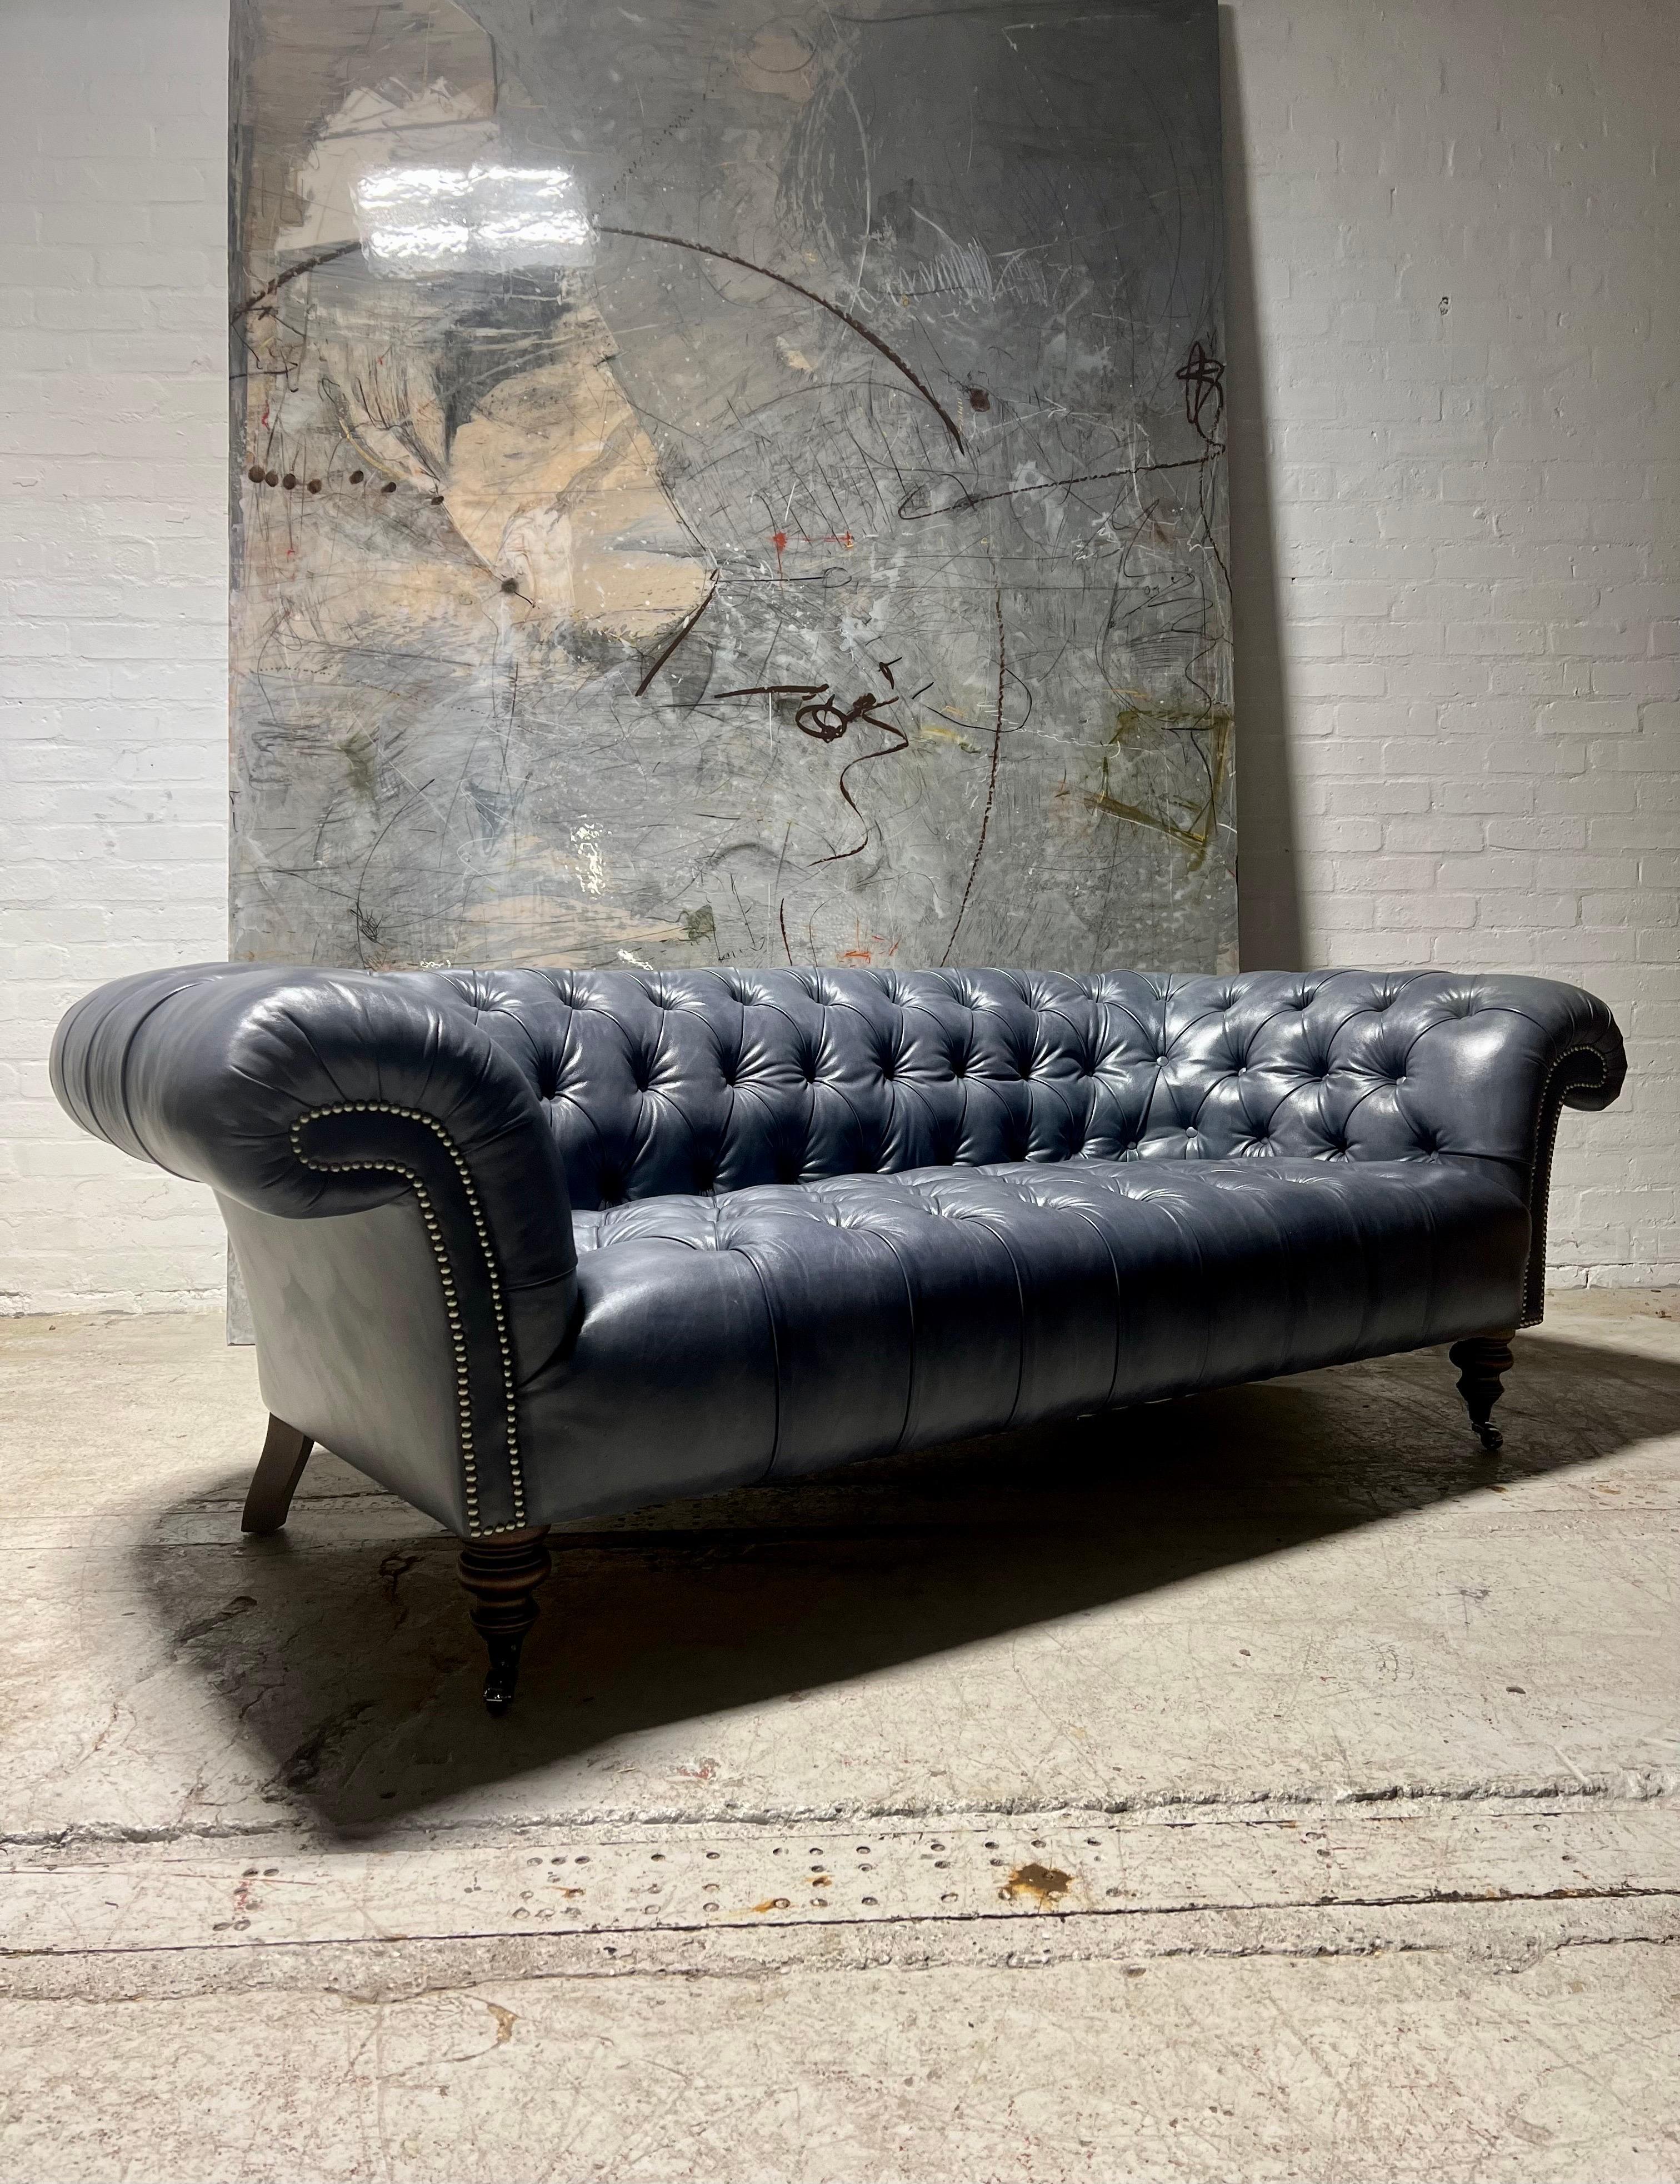 Our Carver Chesterfield sofa is a very classic style of generous proportions that is certain to bring gravitas and elegance to your space.

The very generously rolled arm is very strong with a masculine feel.

We actually offer 5 crafting options